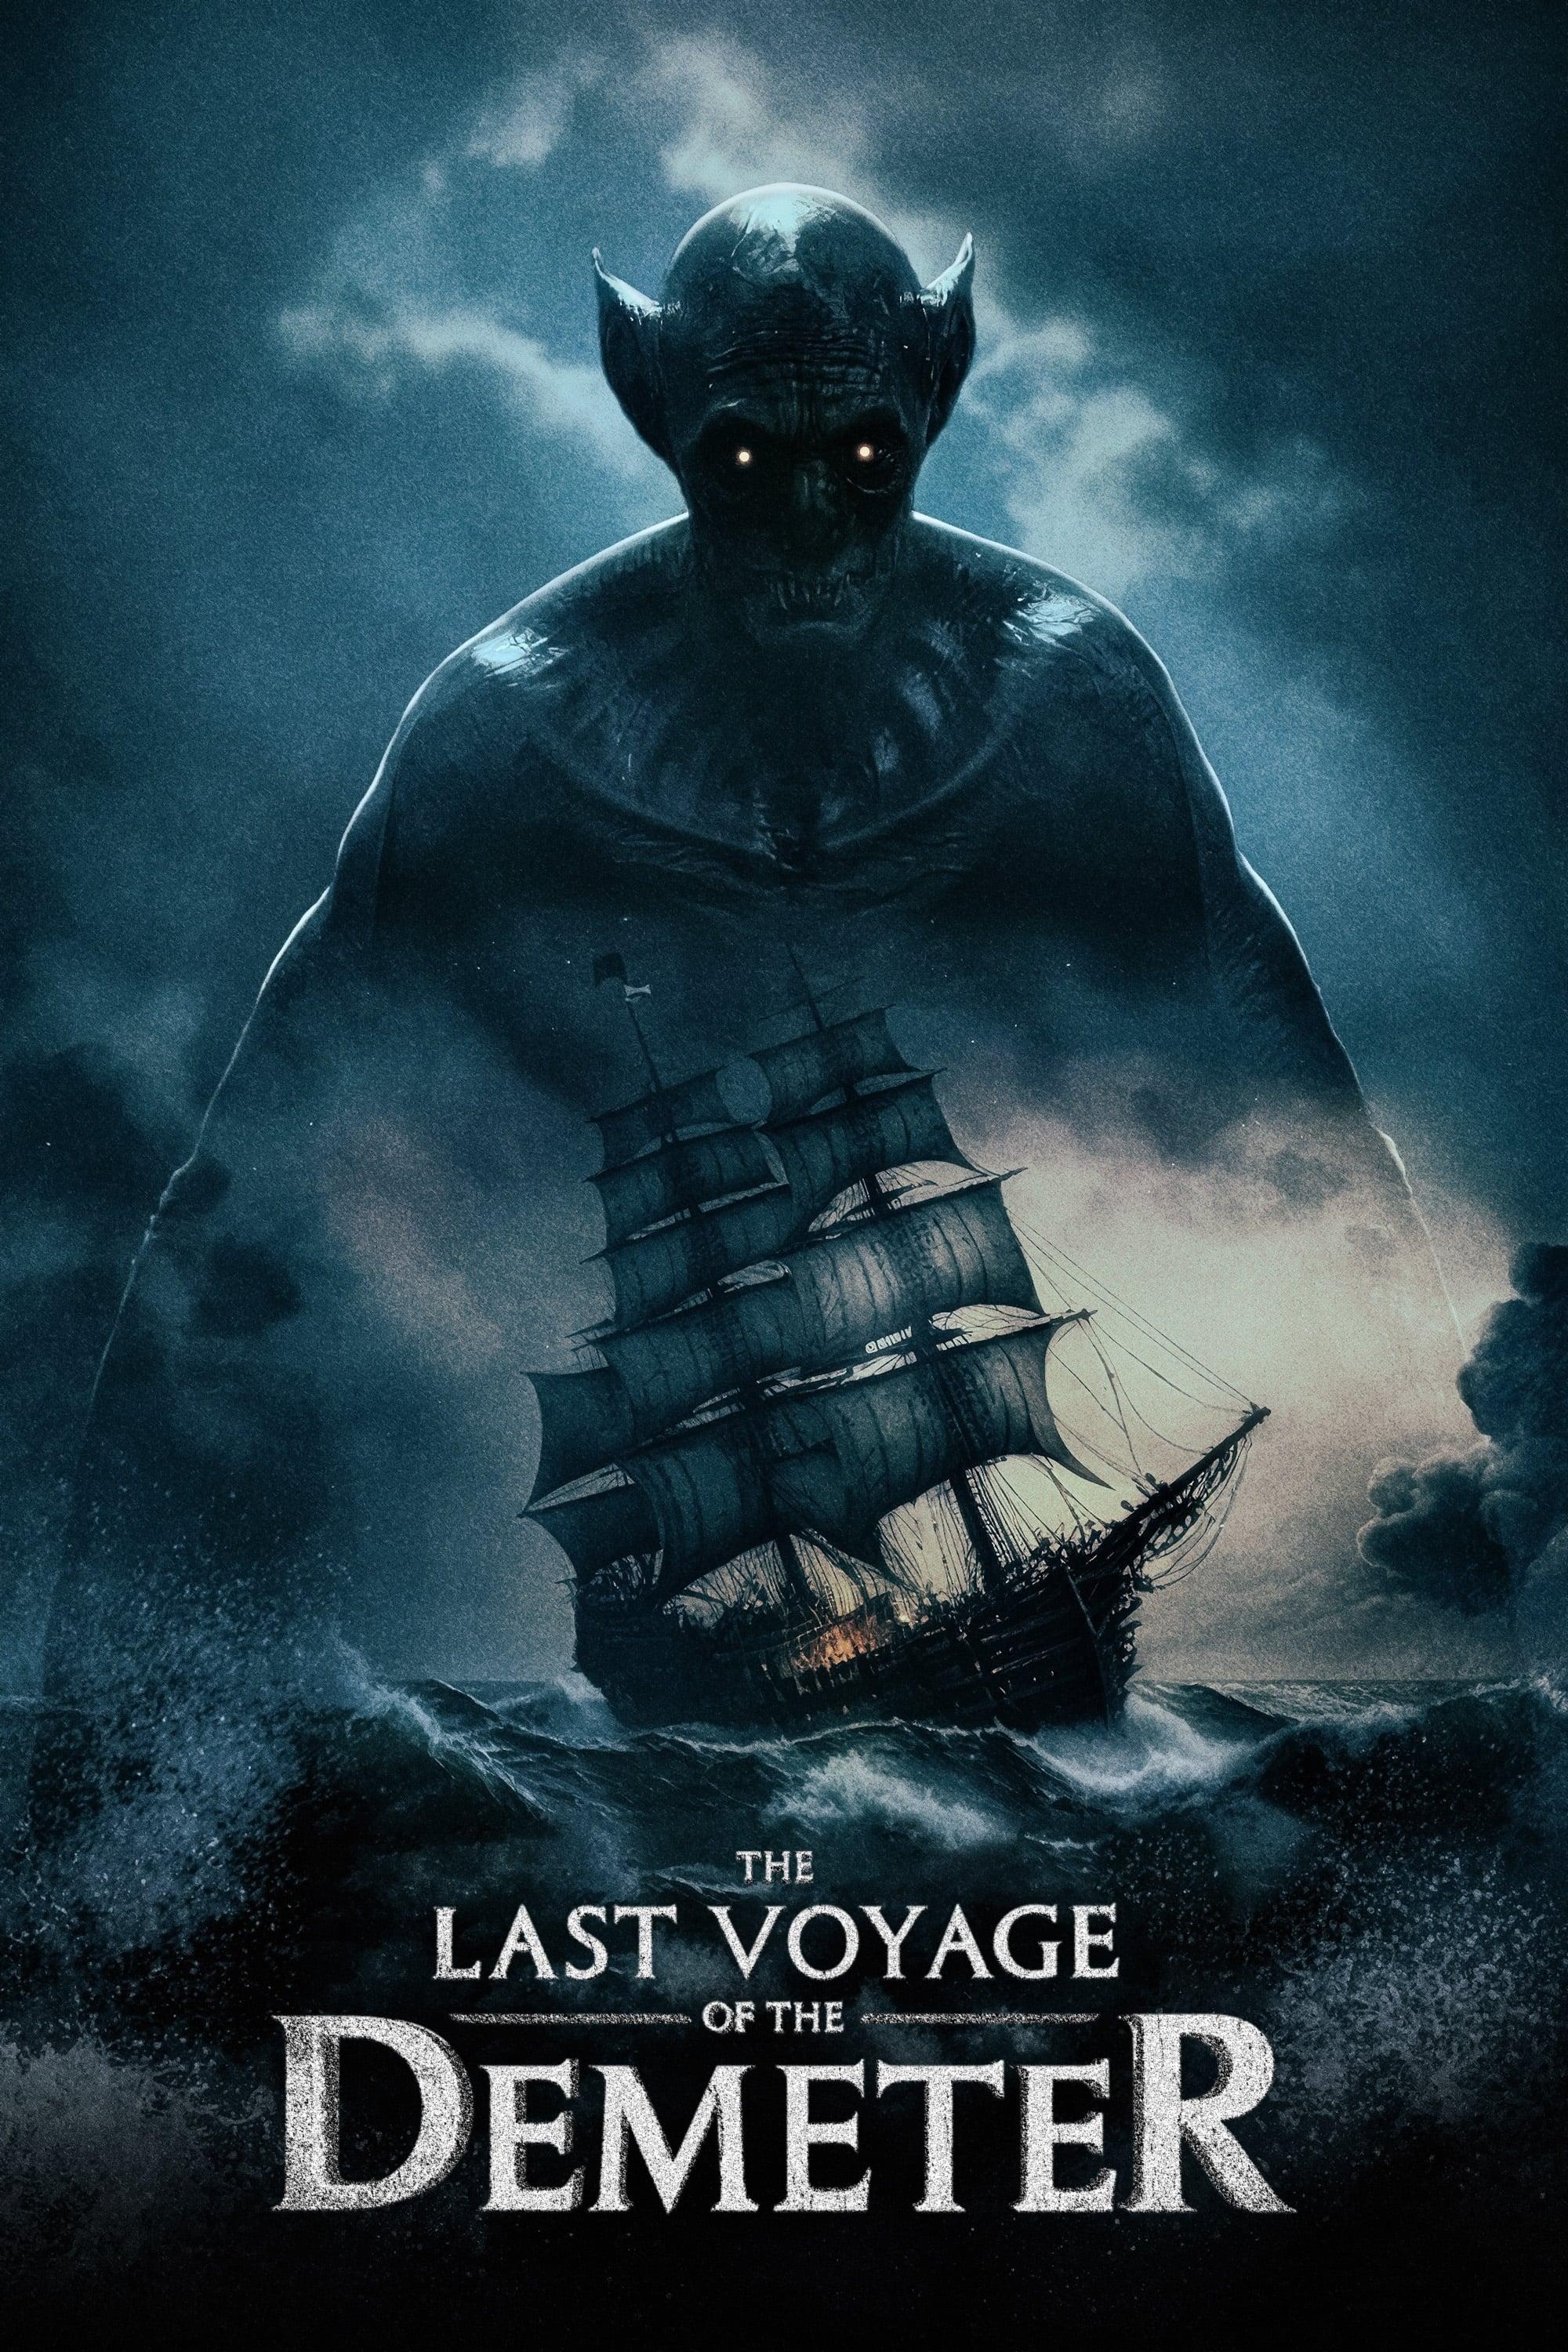 The Last Voyage of the Demeter poster